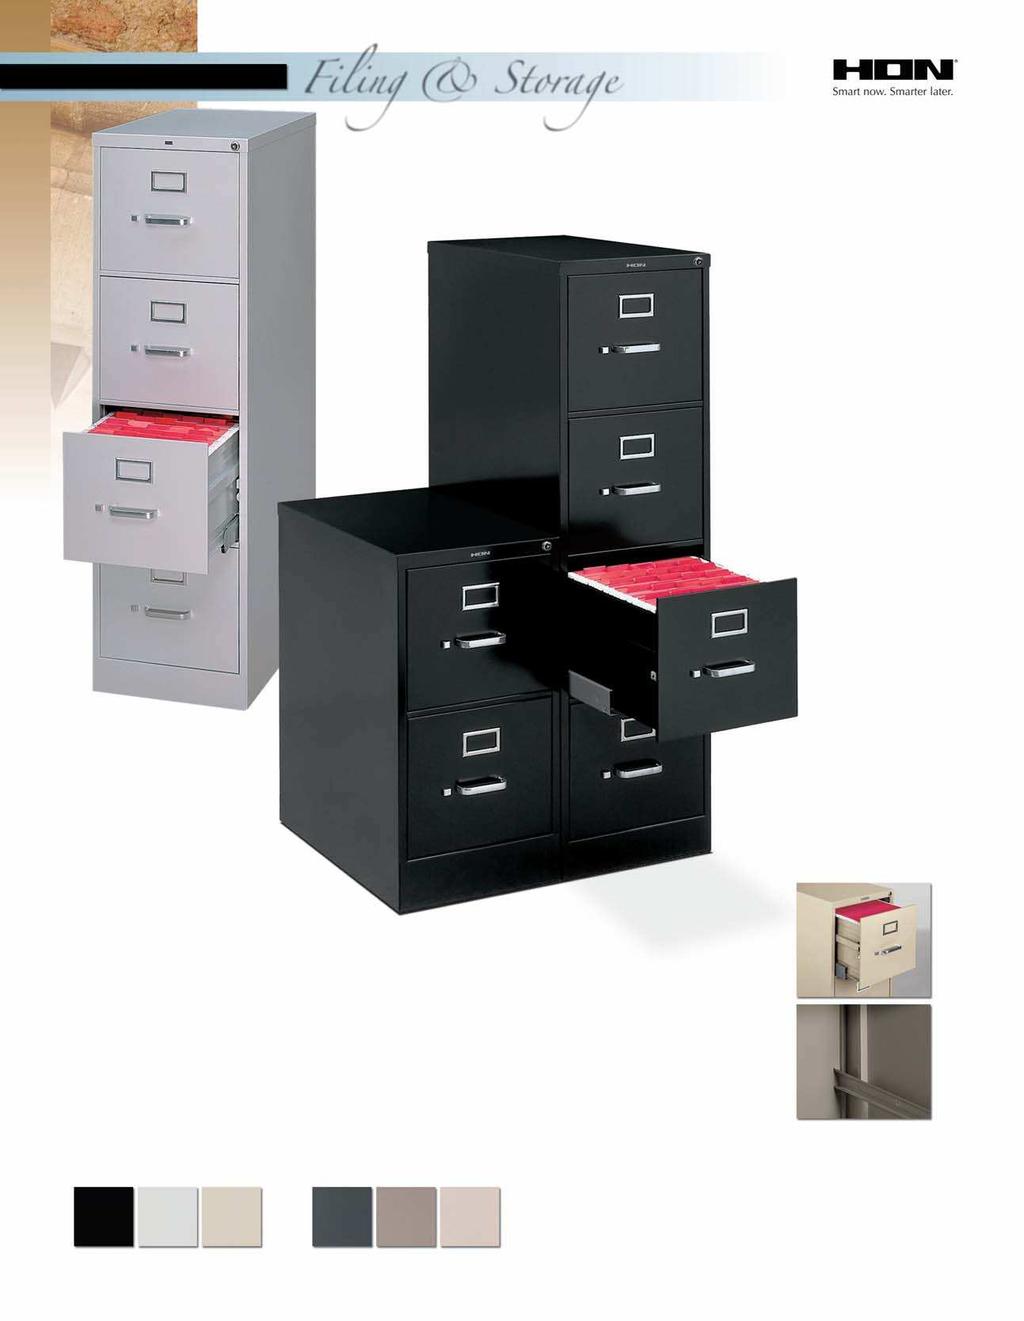 Thumb latch keeps drawers safely closed. Triple-tied, full-suspension drawers. Standard with spring-loaded follower blocks and high drawer sides (to accommodate hanging files) in each drawer.